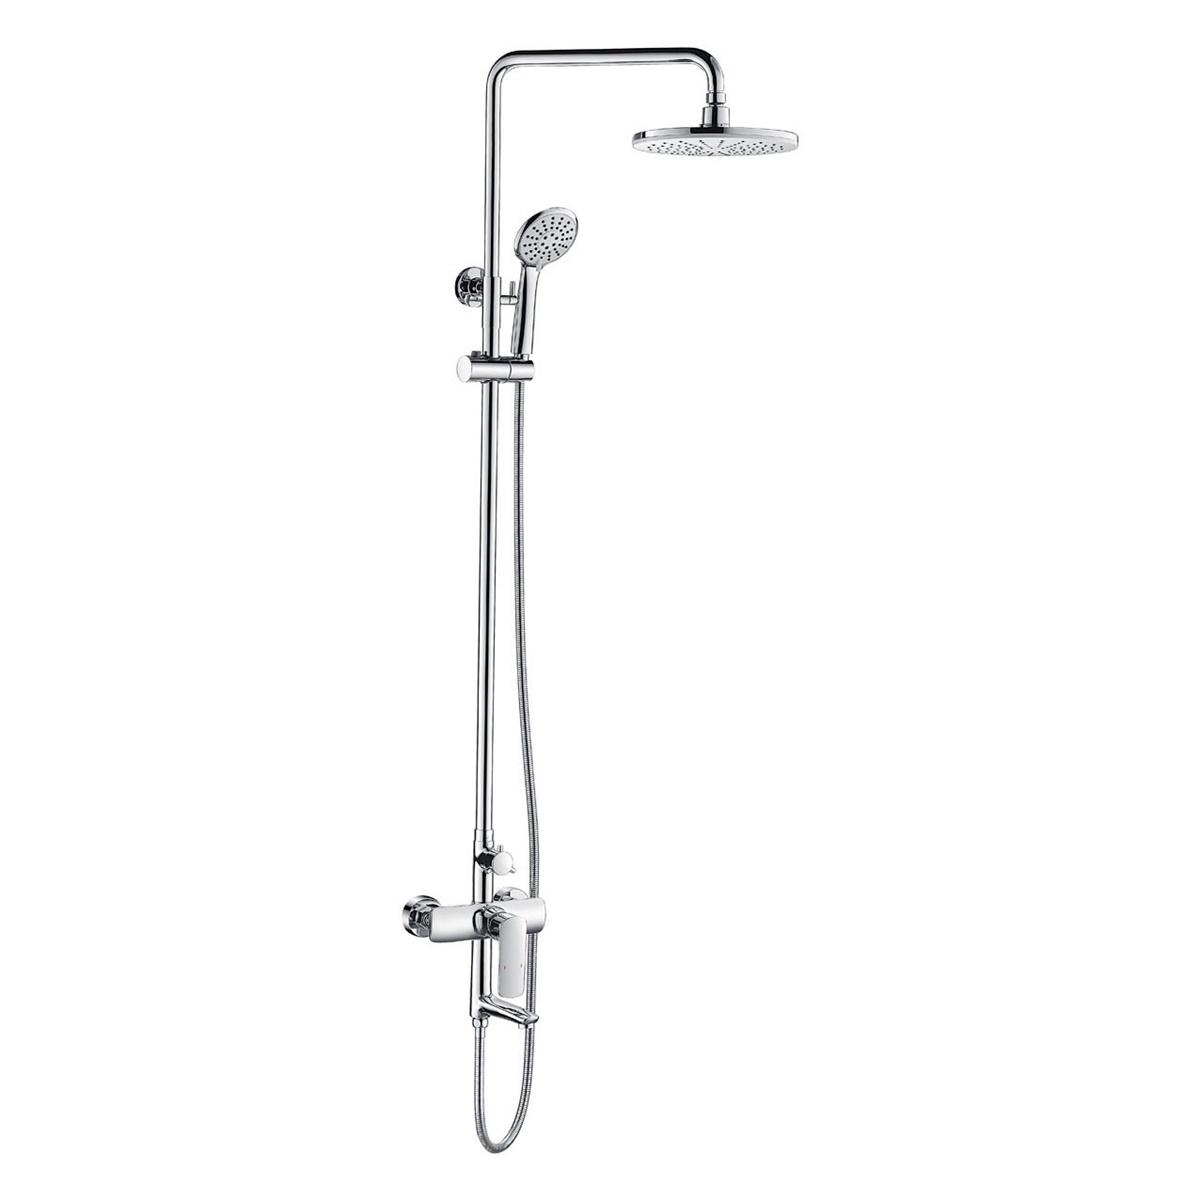 YS34264	Shower column, rain shower column with faucet and spout, height adjustable;